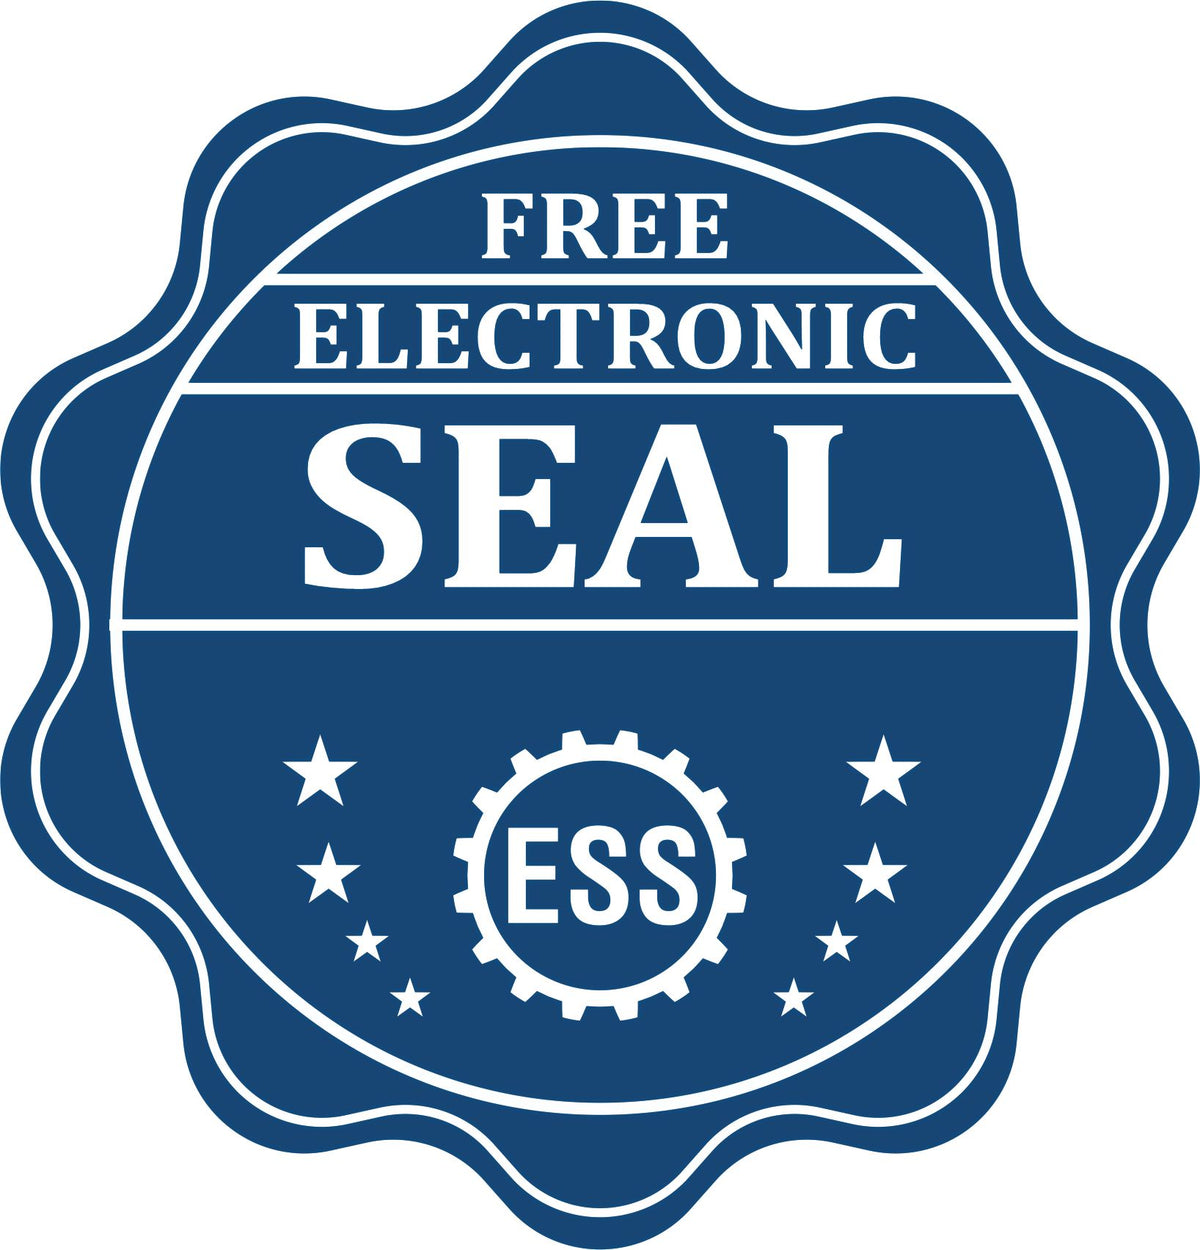 A badge showing a free electronic seal for the Long Reach Florida PE Seal with stars and the ESS gear on the emblem.